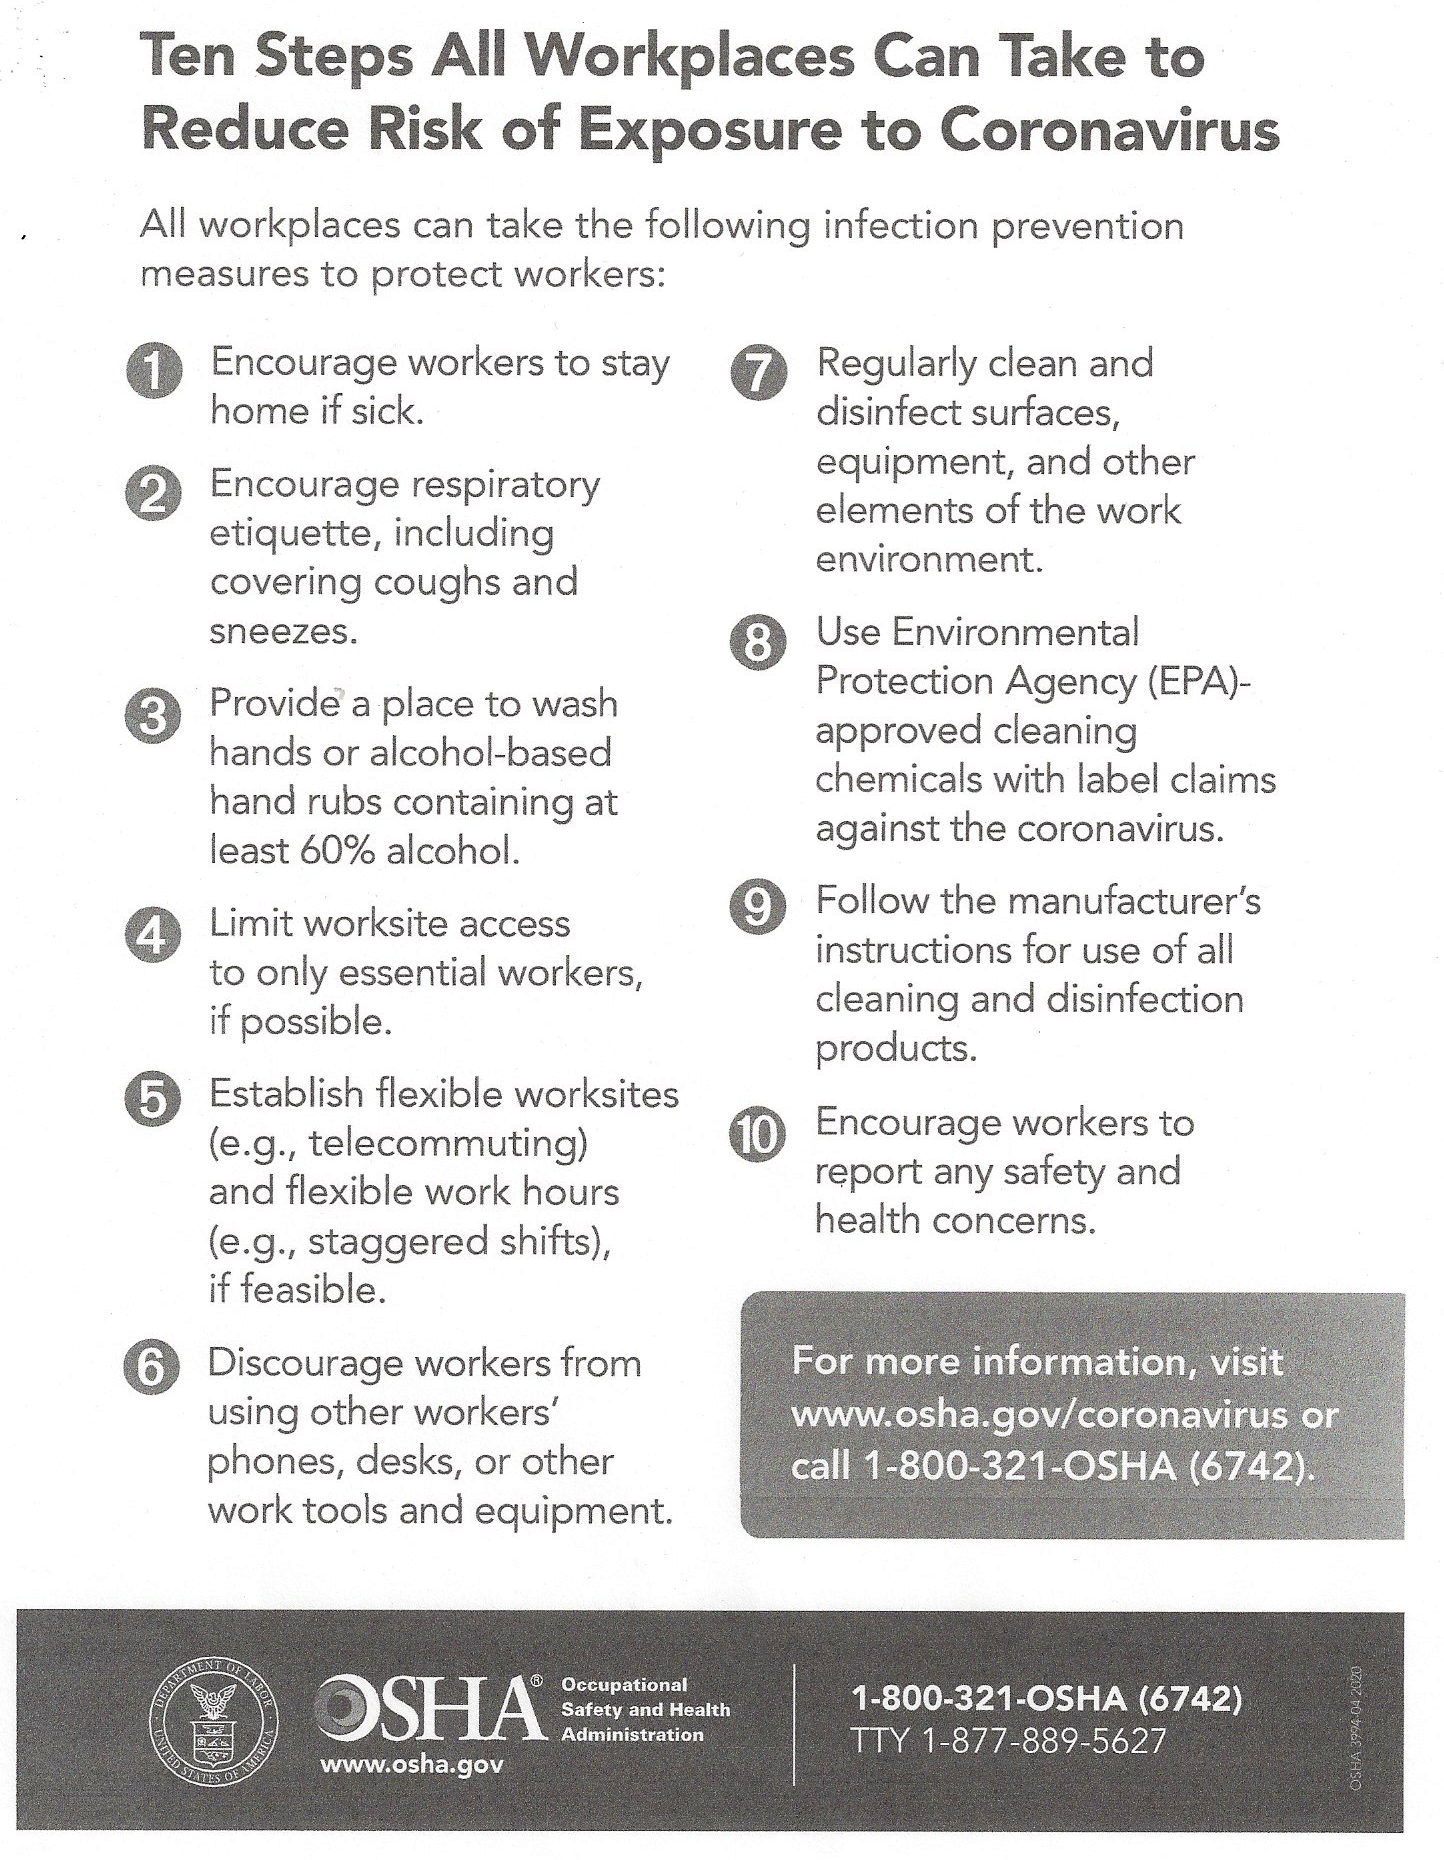 COVID-19 Prevention Tips from OSHA